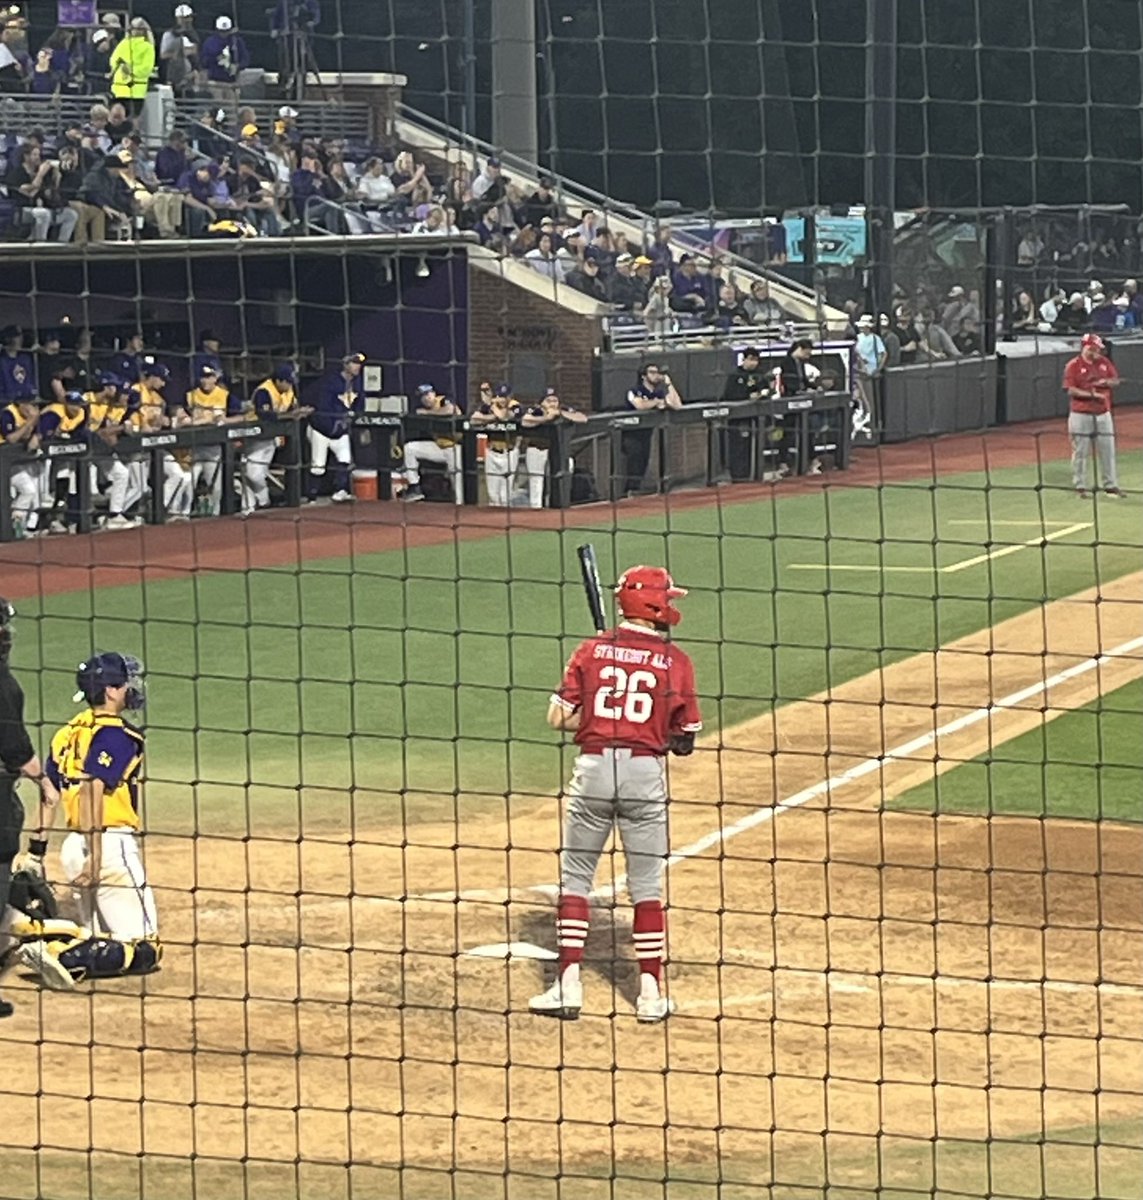 Thanks @ECUBaseball and @NCStateBaseball for continuing to raise awareness for ALS by wearing #23 and #26. @alsassociation